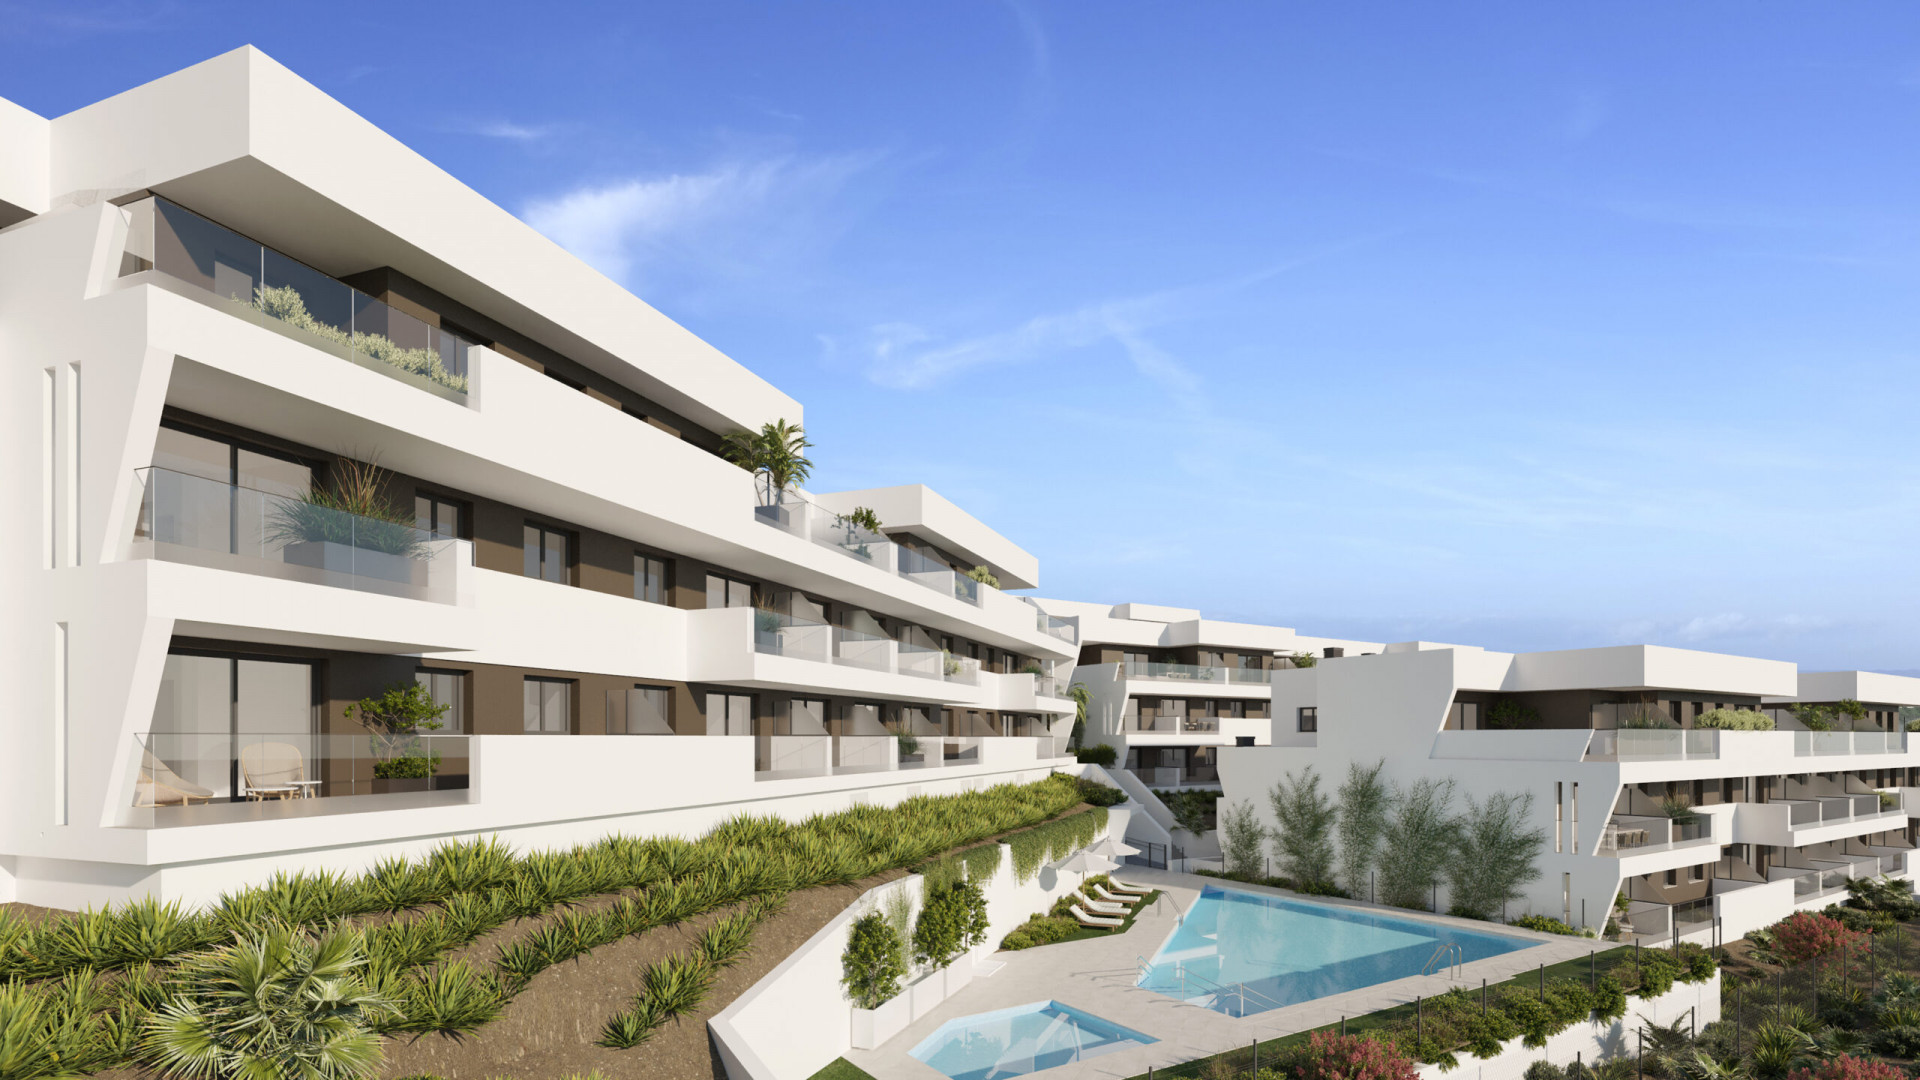 Modern new build flat with three bedrooms in Estepona.